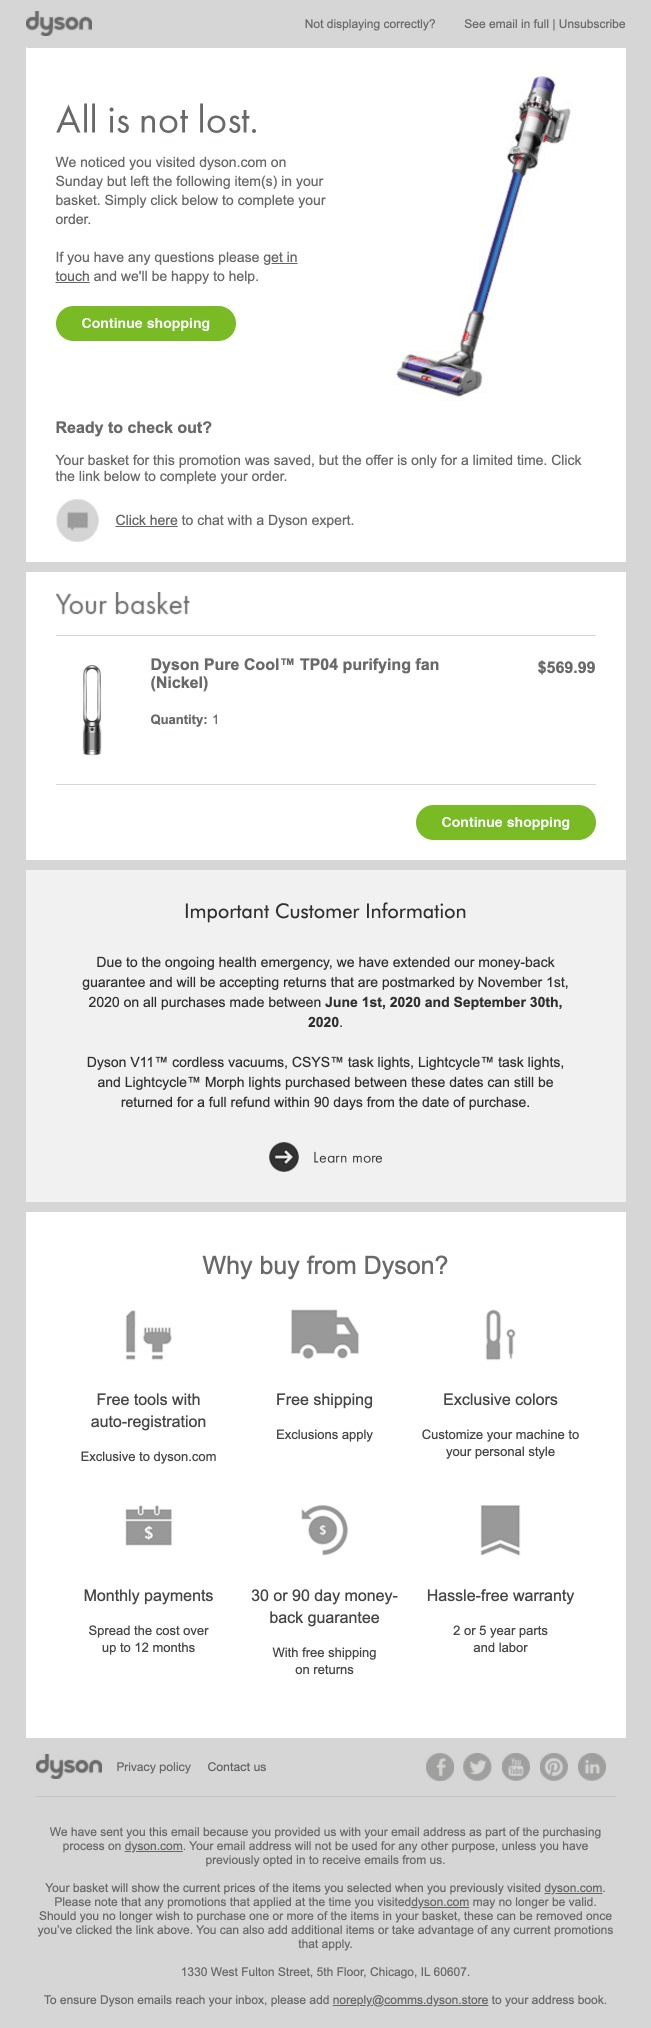 Dyson abandoned cart email